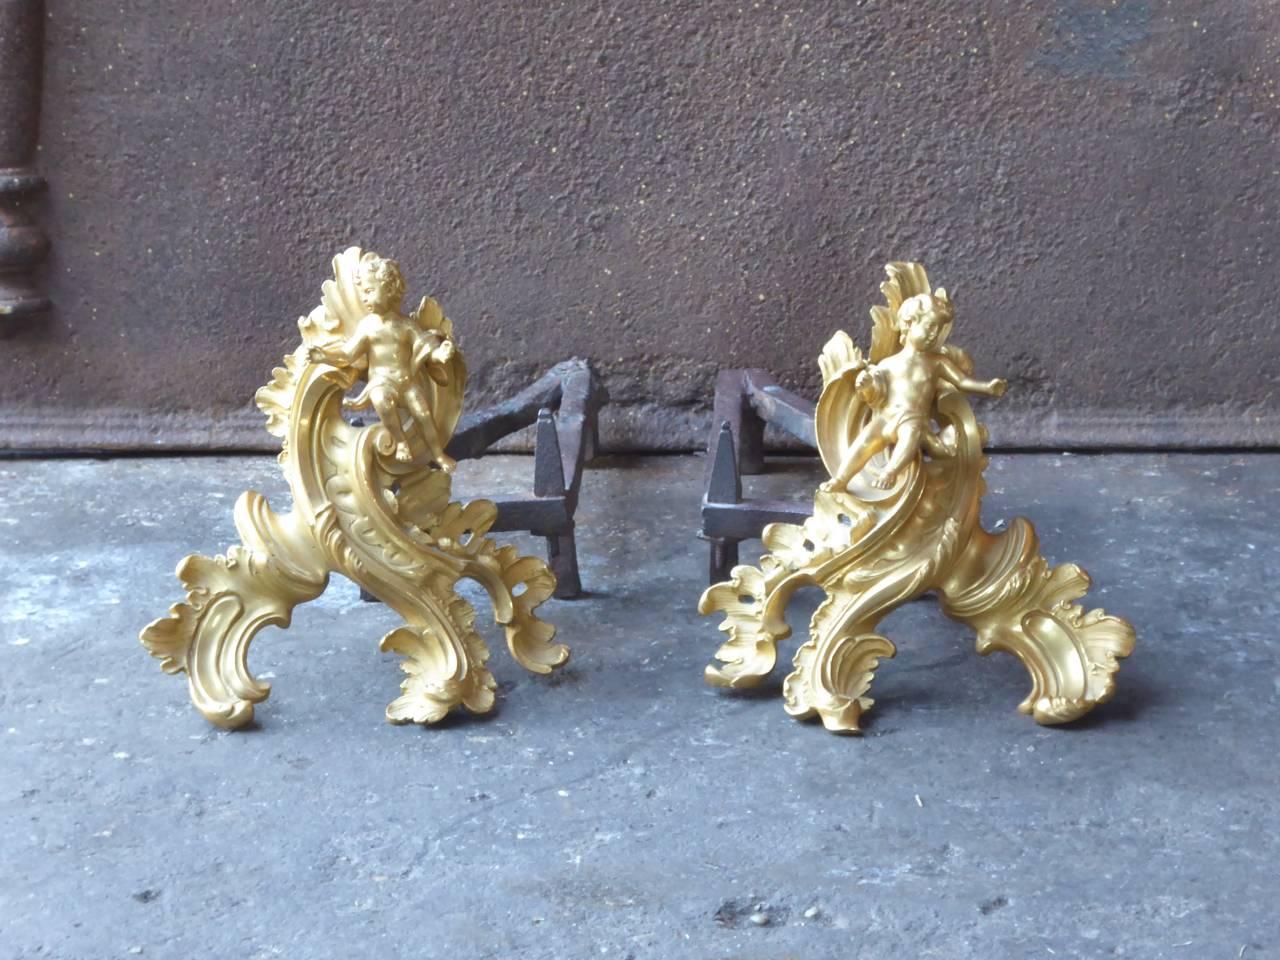 Beautiful 18th century French Louis XV firedogs made of ormolu and wrought iron. The condition is good.

One of the most valuable secrets of French metalworkers in the 18th and early 19th century was the gilding of brass and bronze, called ormolu.